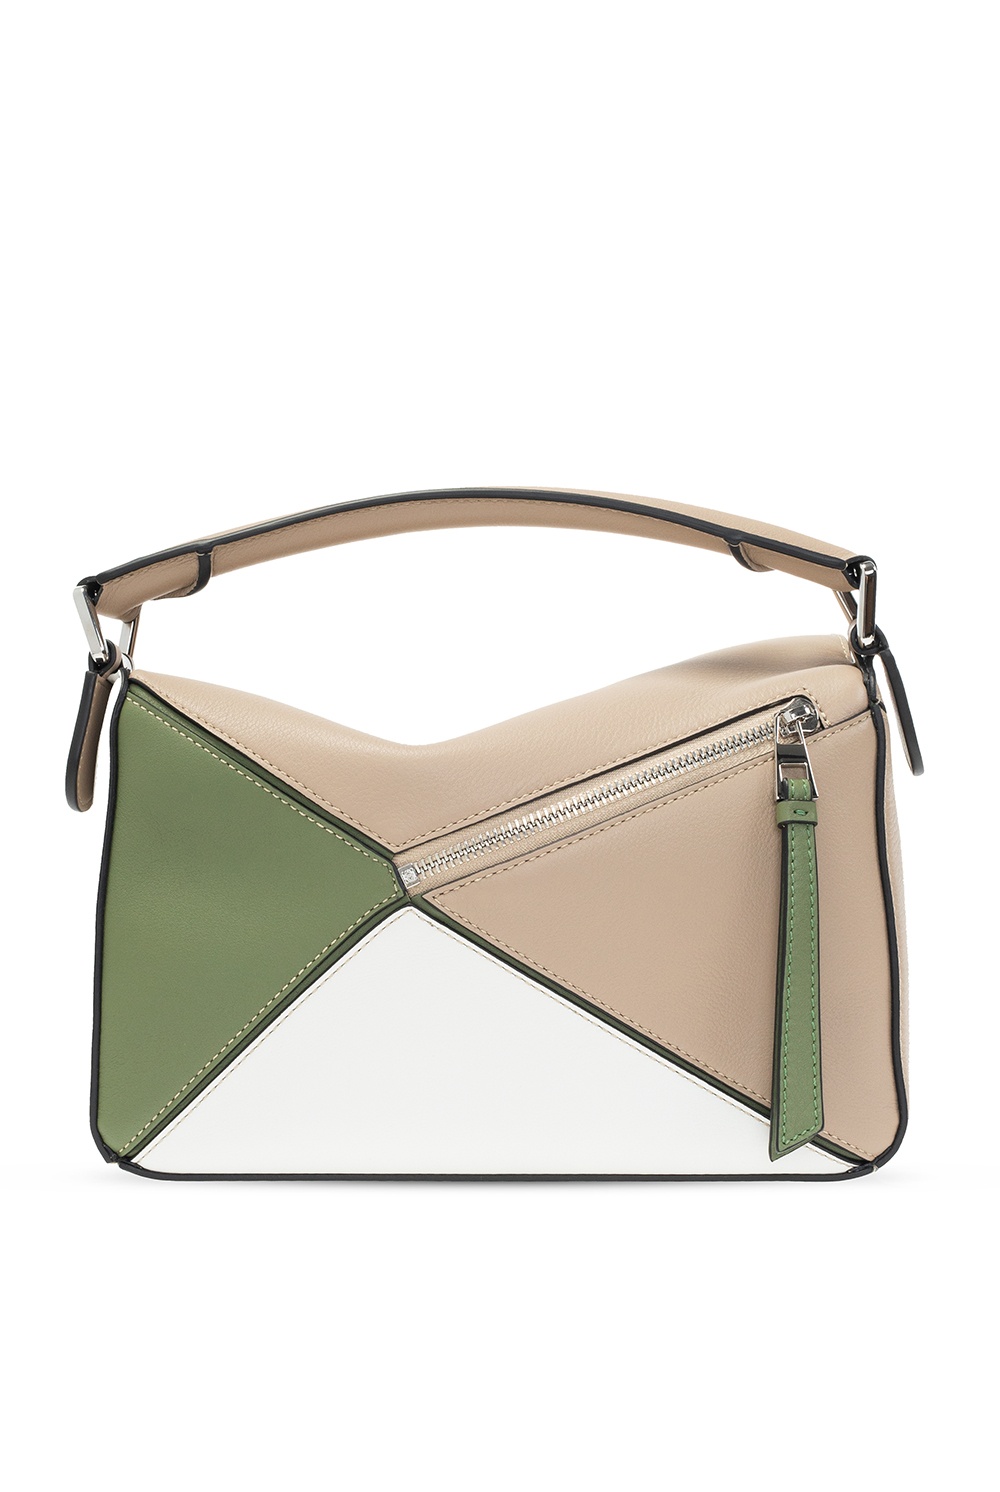 Loewe Puzzle Small Avocado Green - Kaialux